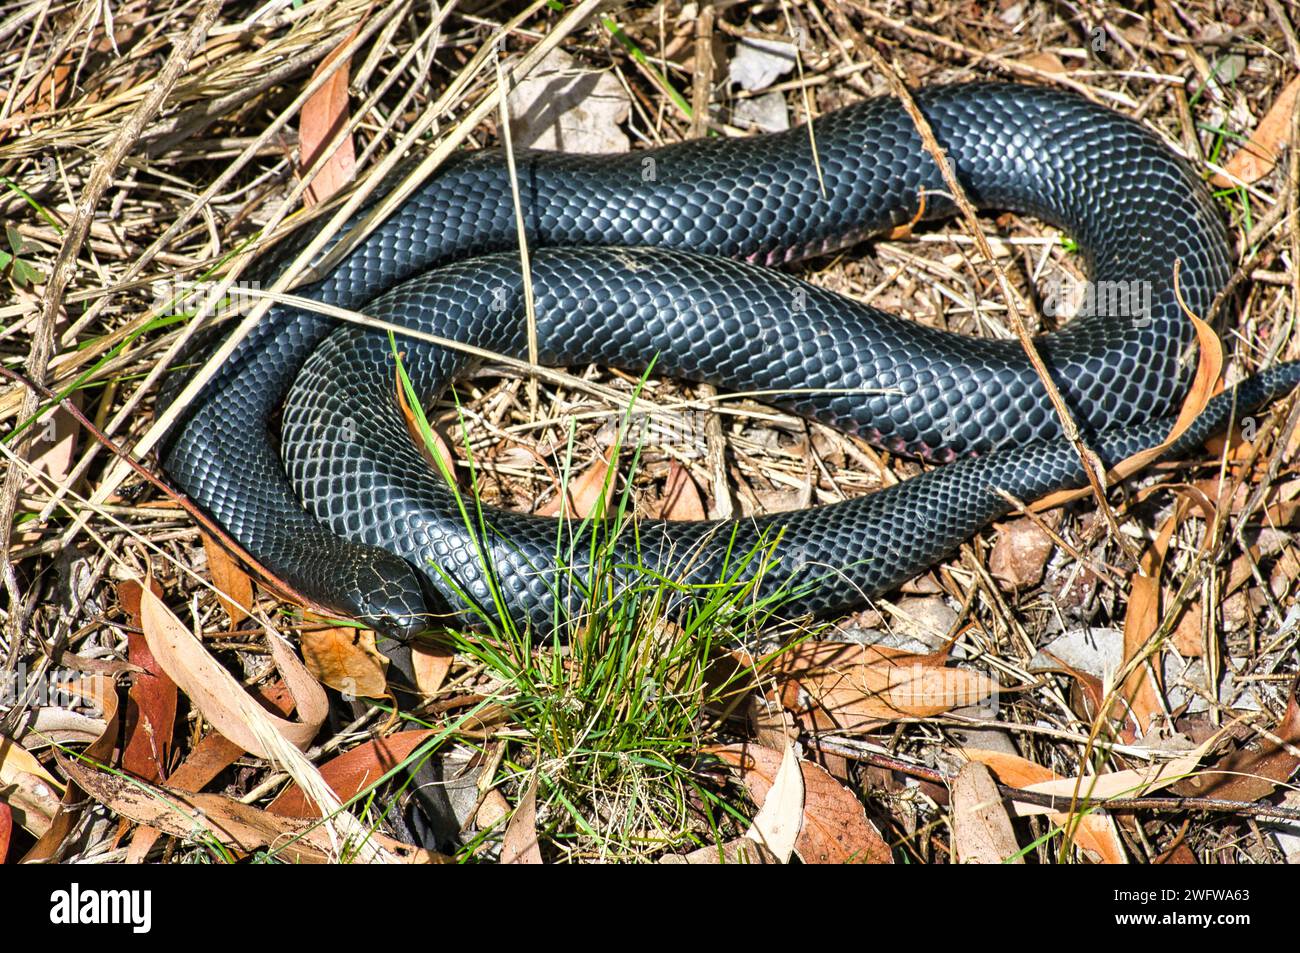 A red-bellied black snake (Pseudechis porphyriacus) in an eucalyptus forest in Victoria, Australia Stock Photo